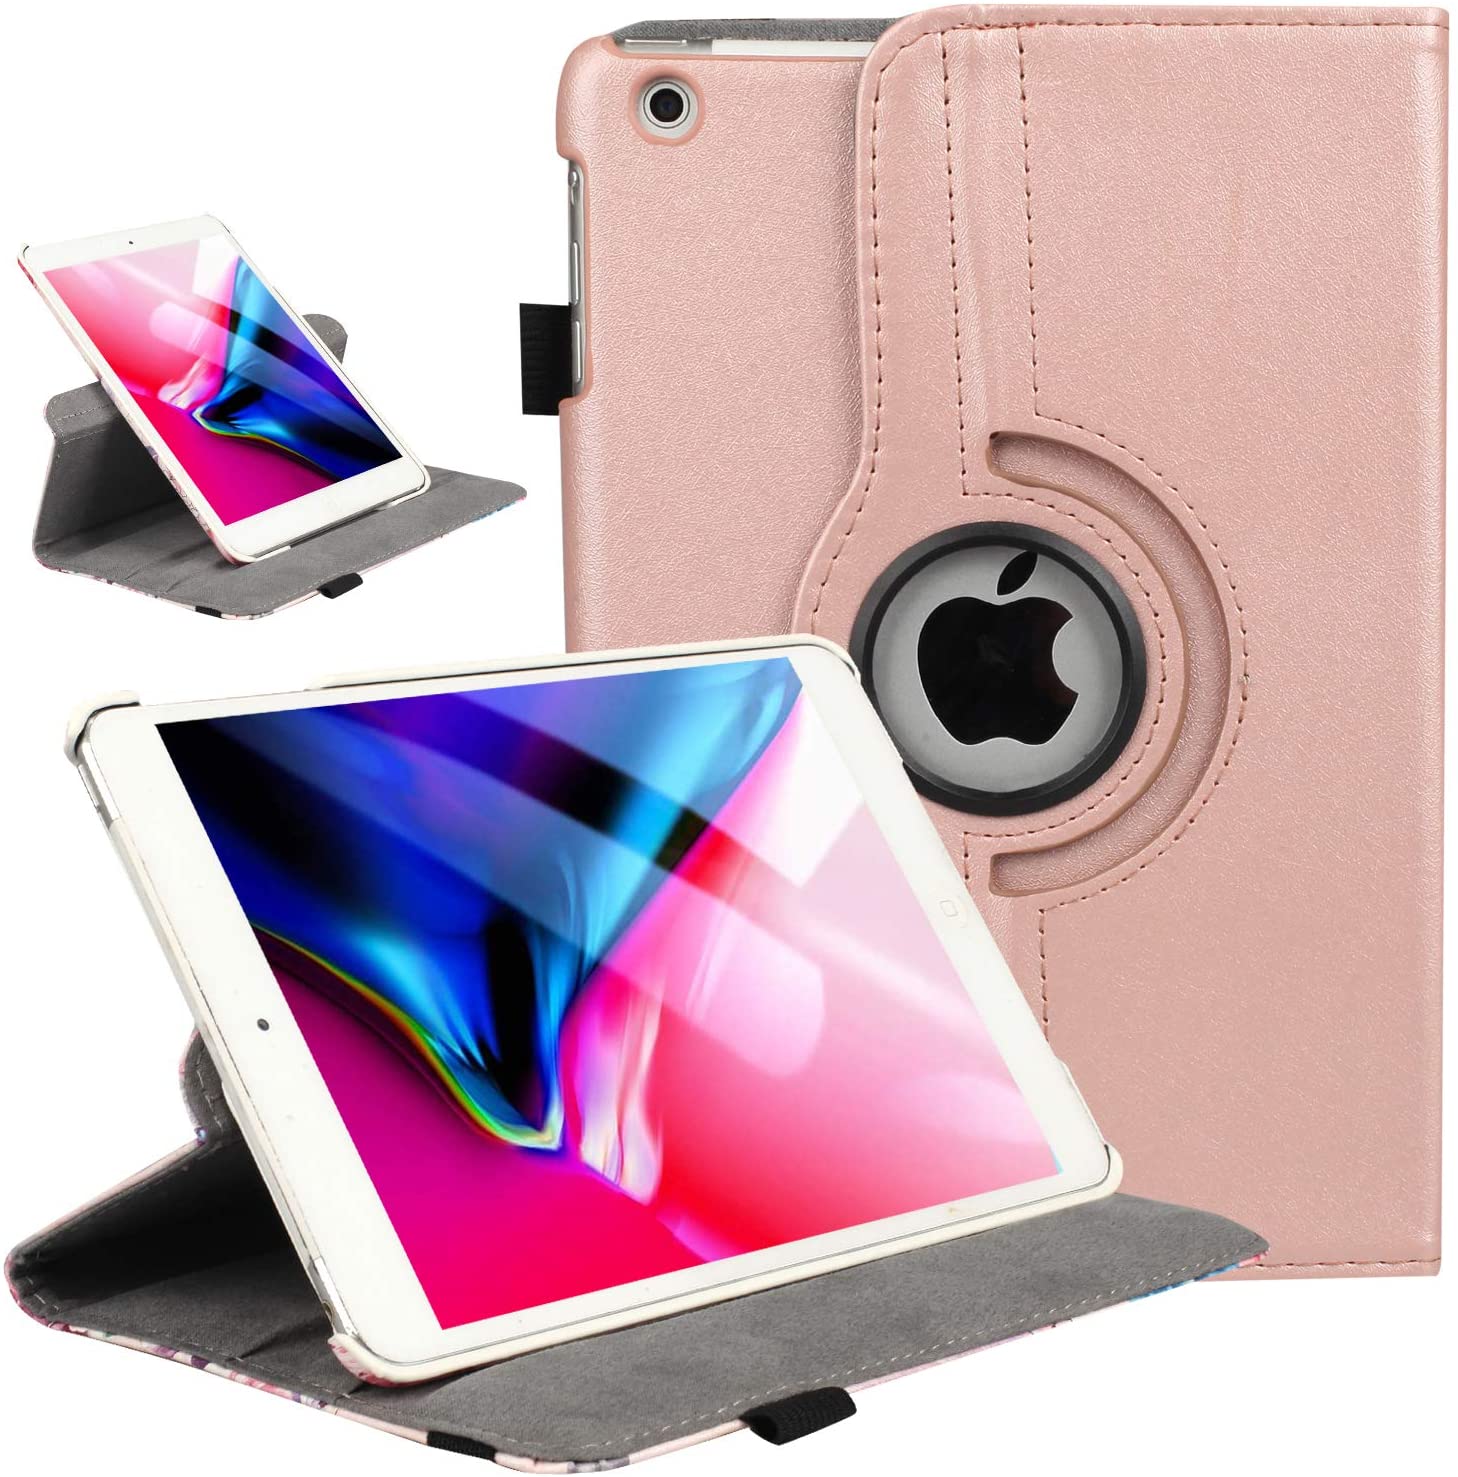 iPad Mini 1/2/3 Case 360 Degree Rotating Stand Case Cover with Auto Sleep/Wake Feature Smart PU Leather) - ROSE GOLD. - e4cents